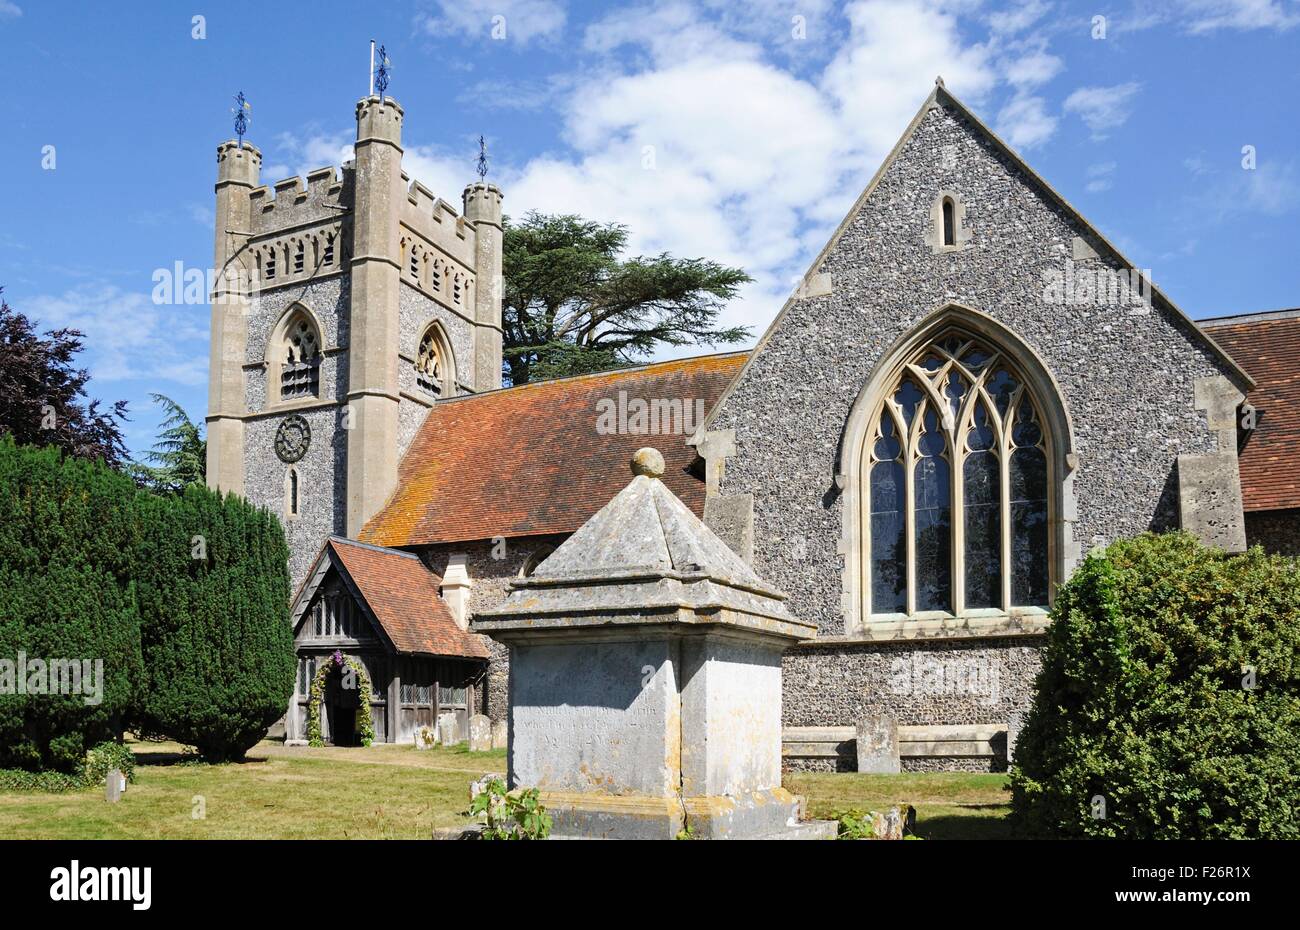 Church of St Mary the Virgin and churchyard in the village centre, Hambledon, Oxfordshire, England, UK, Western Europe. Stock Photo